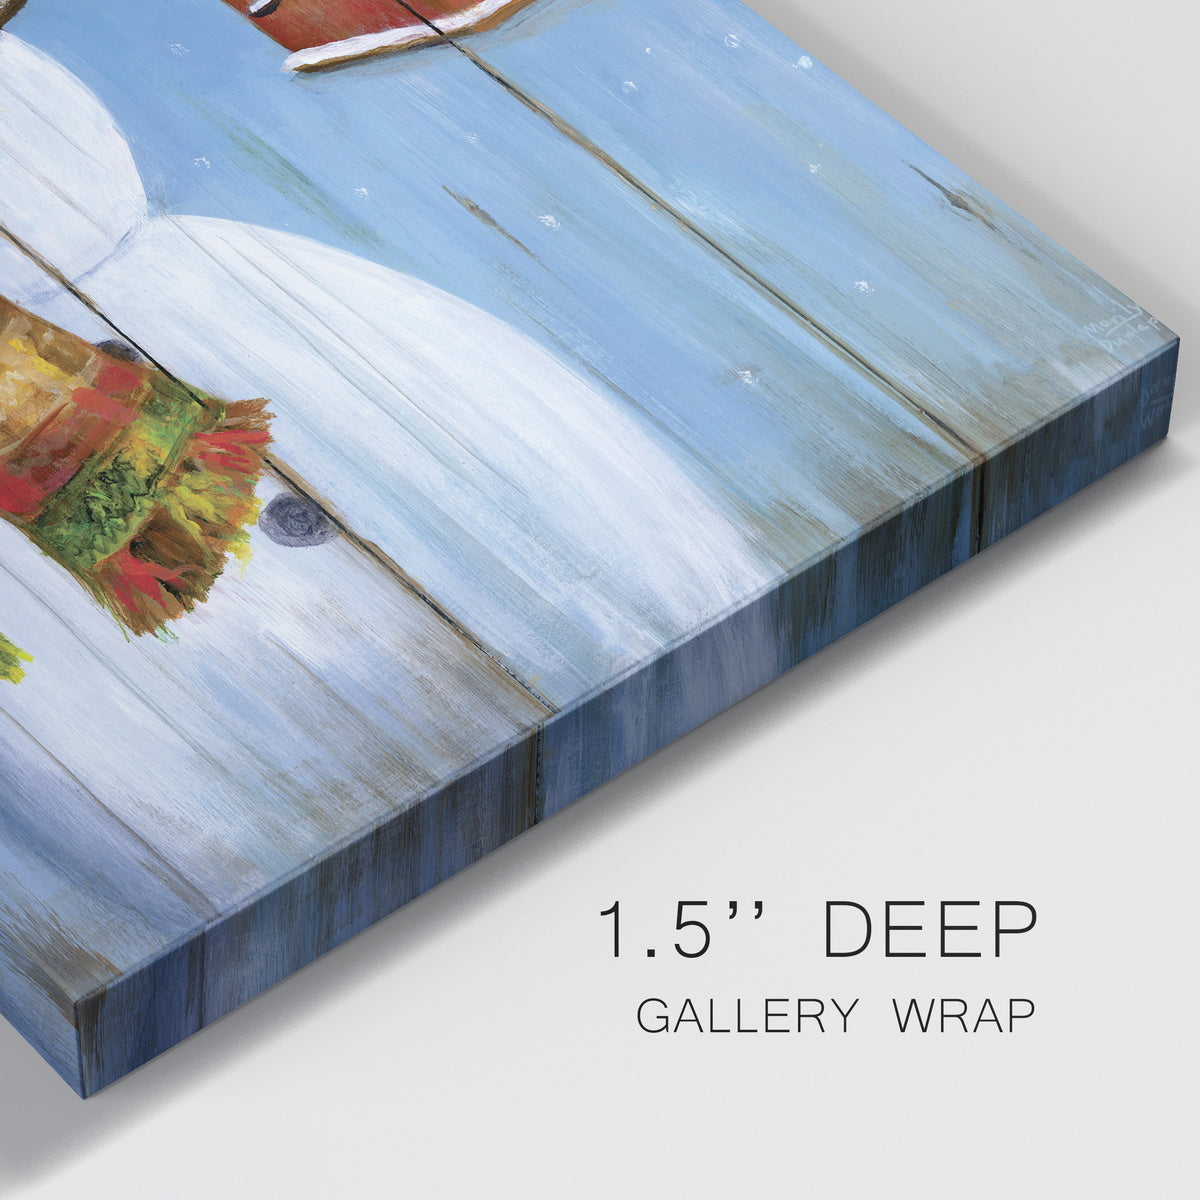 Winter Kisses Premium Gallery Wrapped Canvas - Ready to Hang